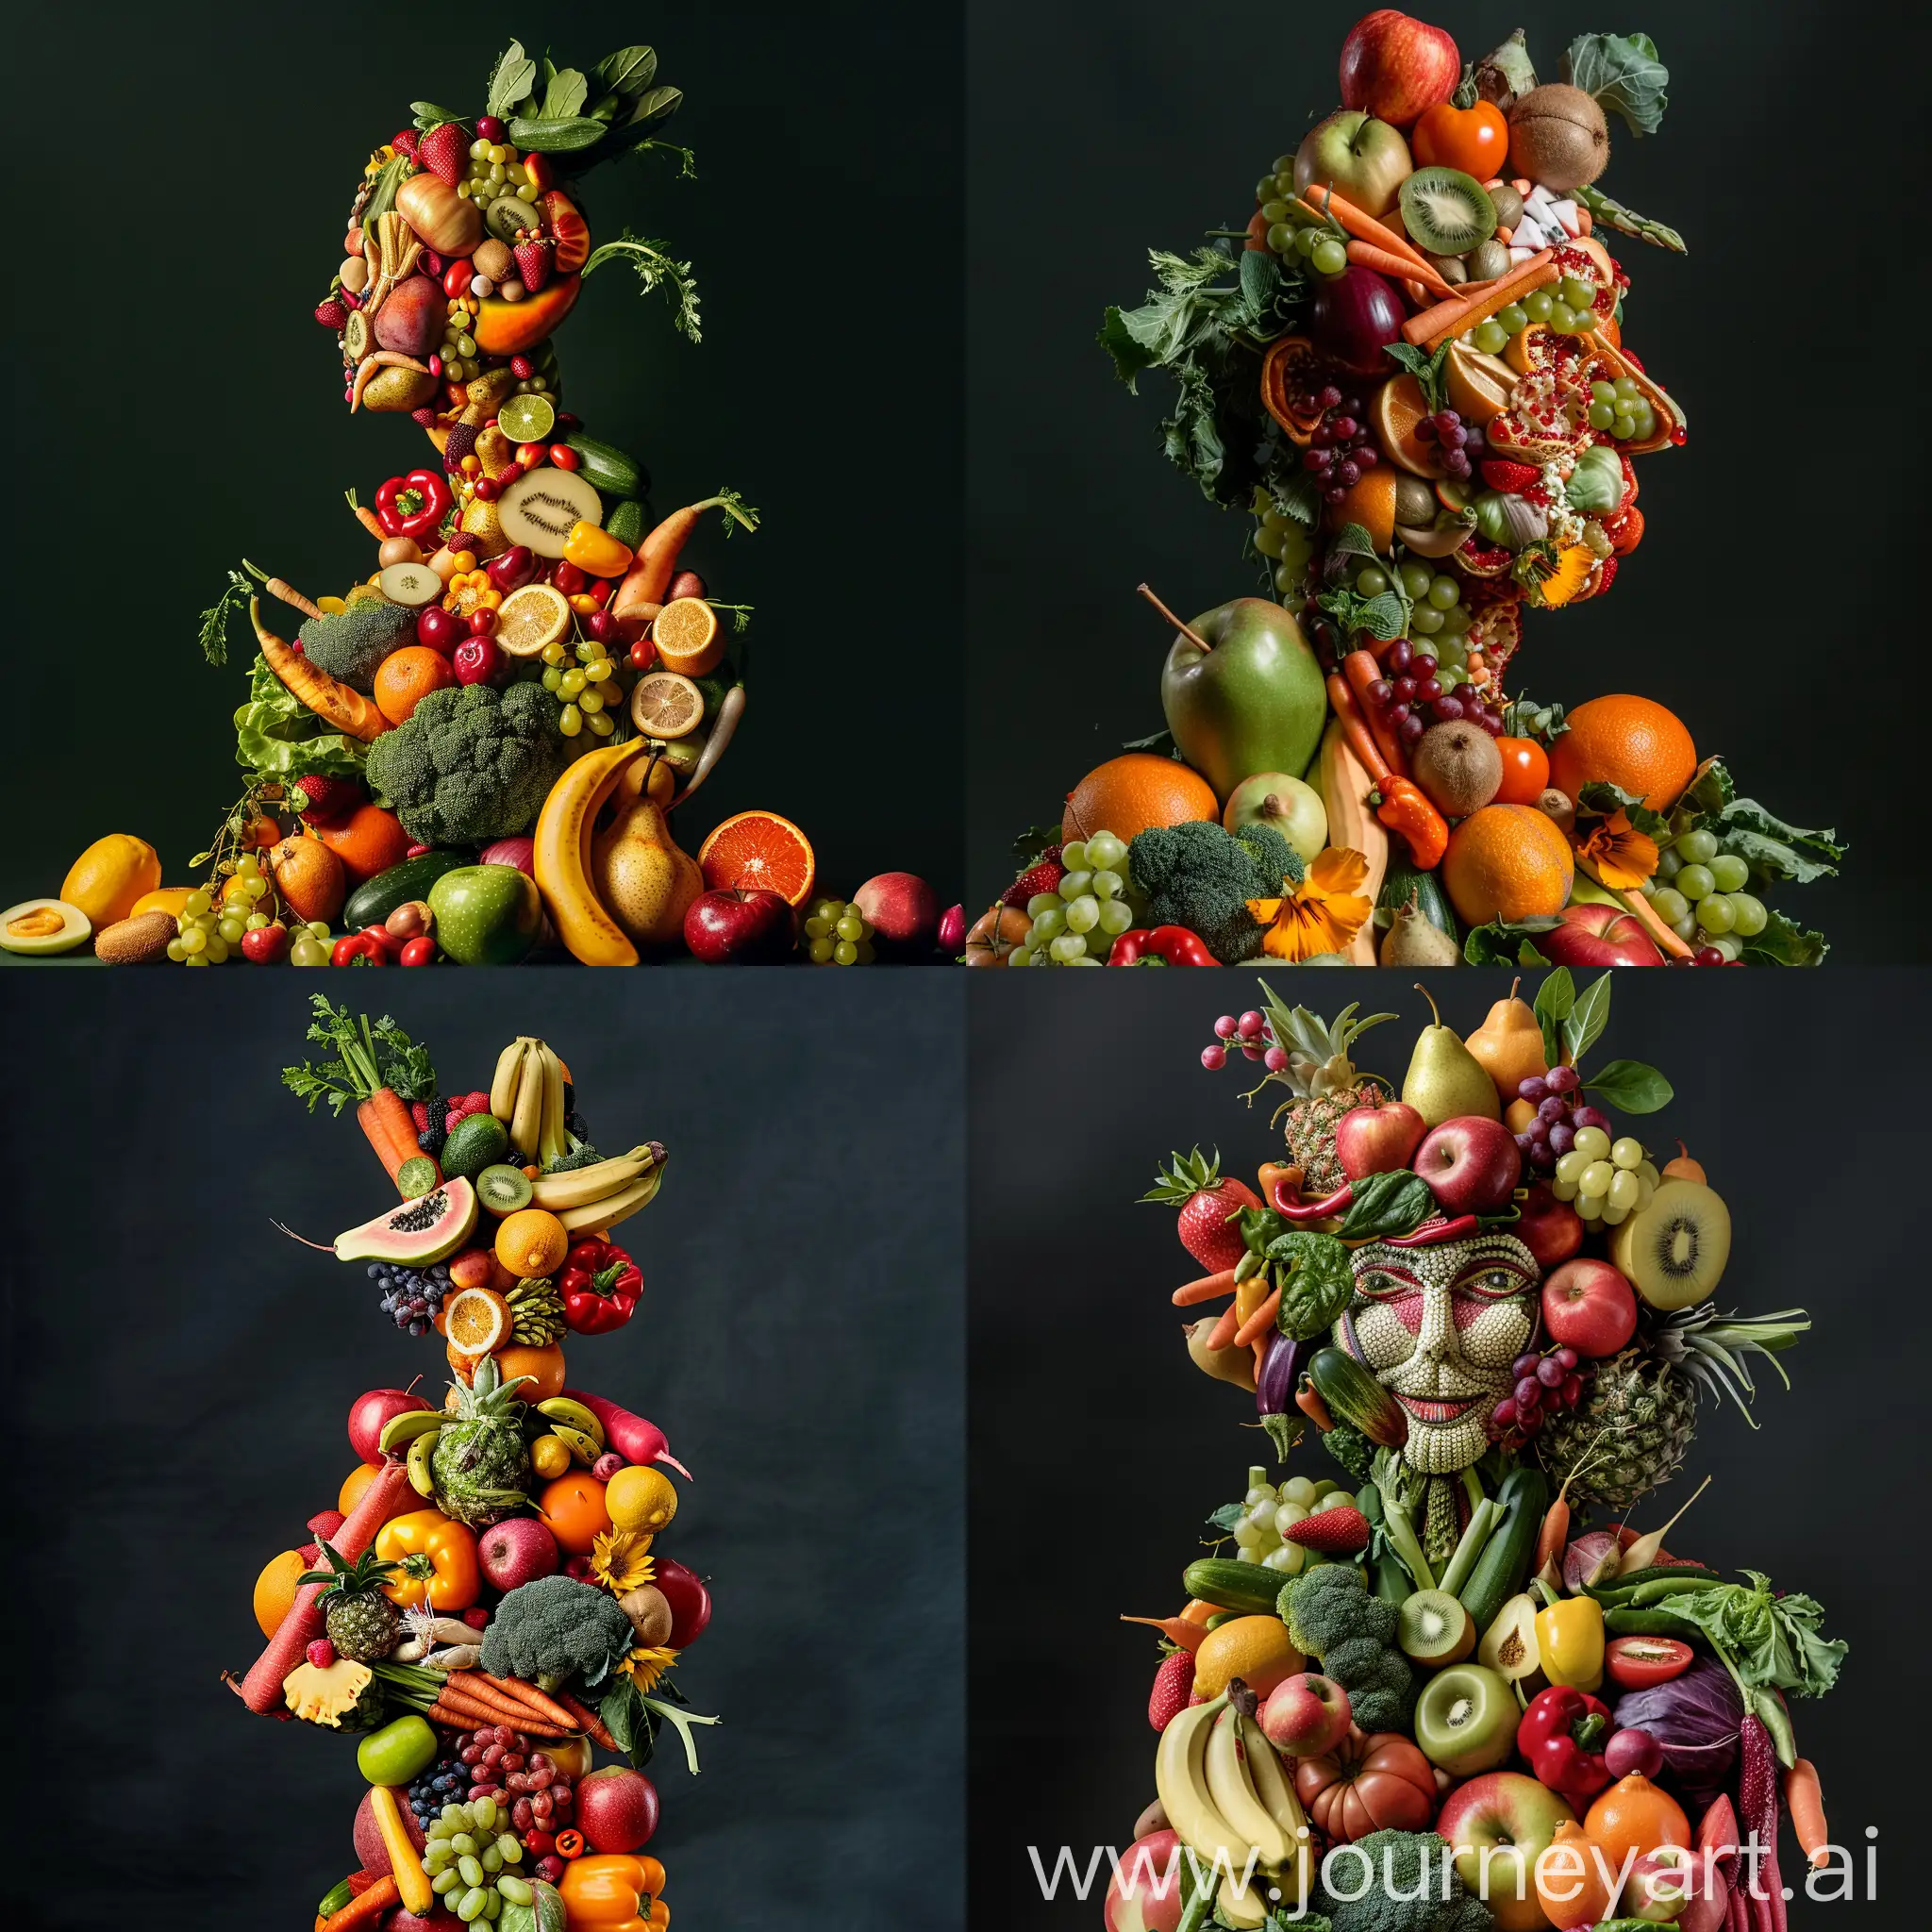 image of a person consisting entirely of fruits and vegetables, using a camera setup that mimics a large aperture, f/1.4